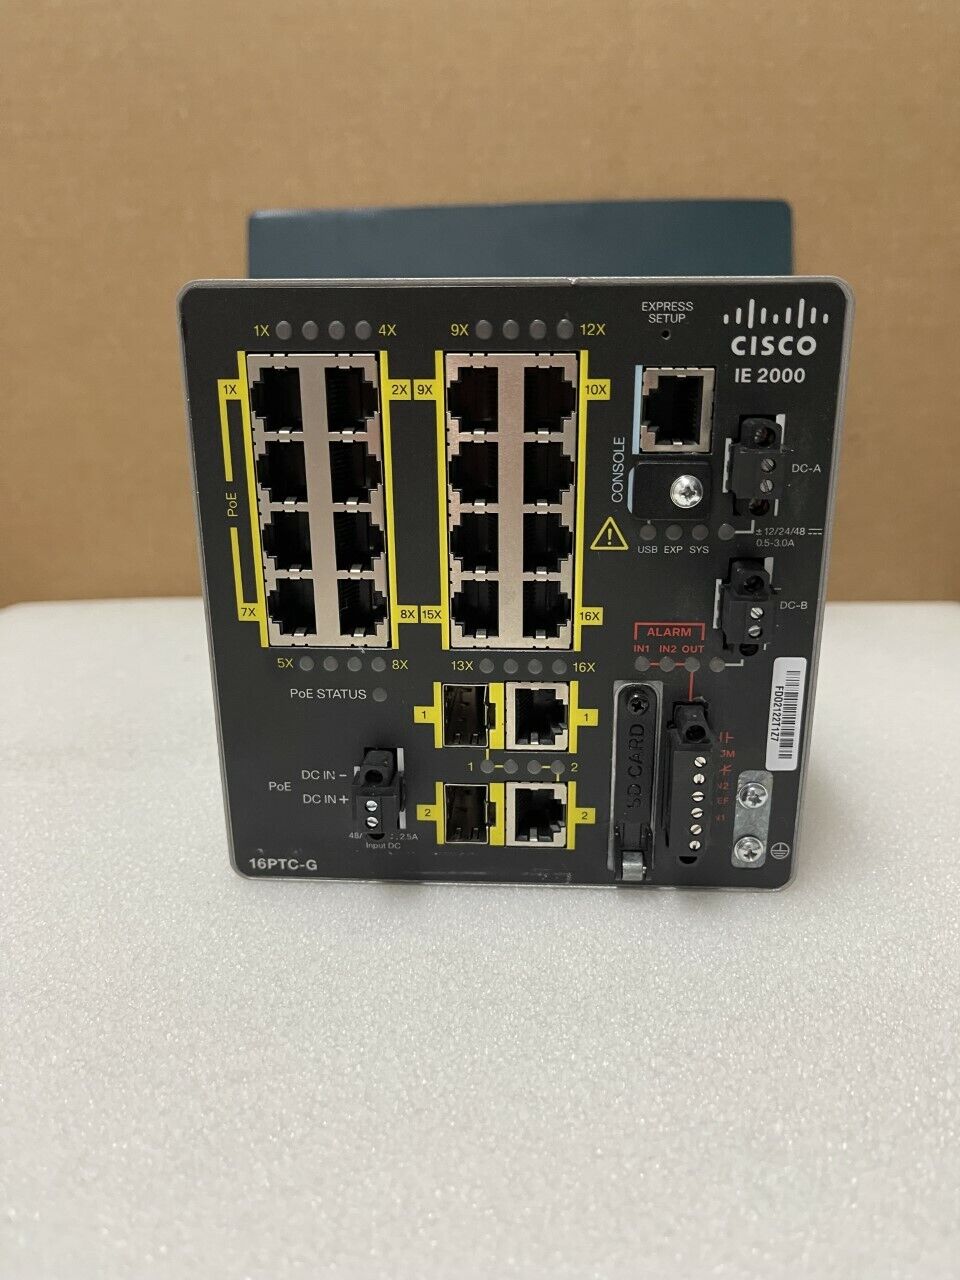 Cisco IE-2000-16PTC-G-E Industrial Network Switch Managed Fast Ethernet